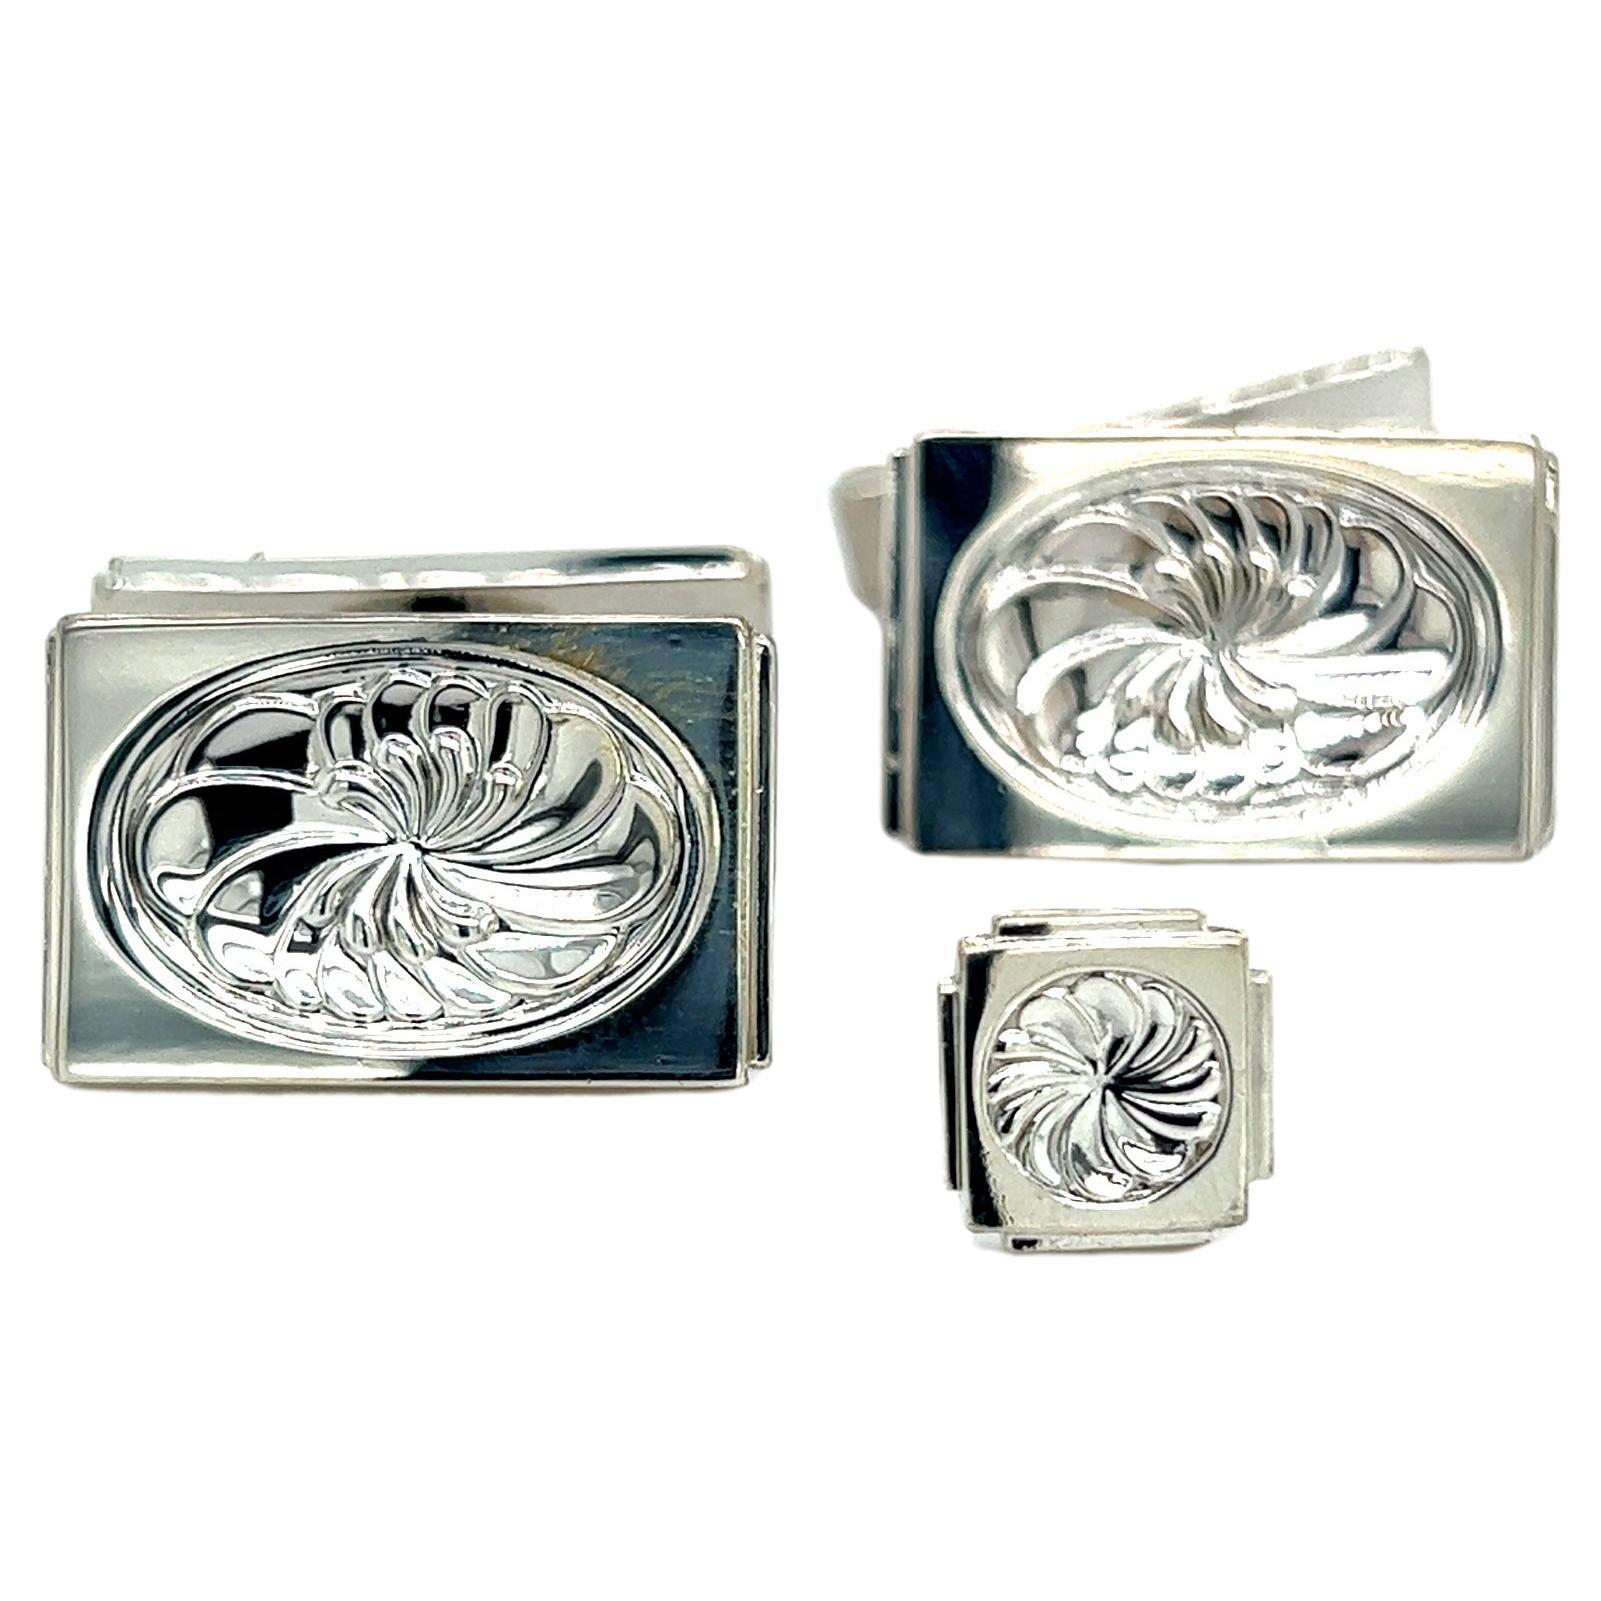 Georg Jensen Estate Mens Cufflinks Set with Tie Pin Without Back of Tie Pin